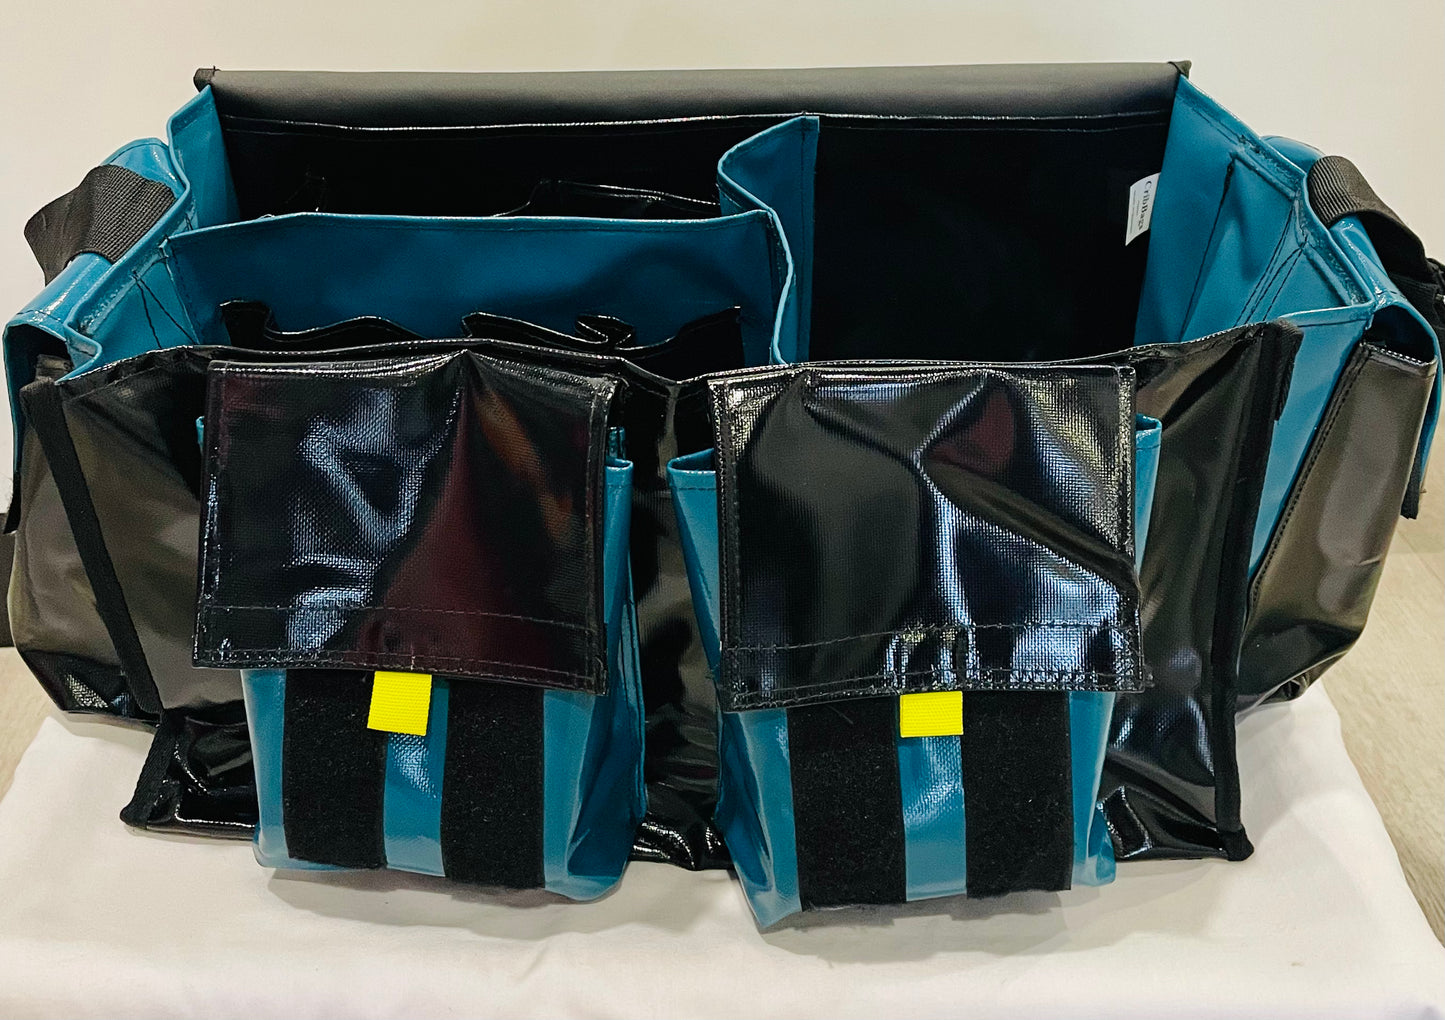 CribBags Extra Large Black and Teal Crib bag. Tough Vinyl Construct 4 pockets outside, 3 pockets inside